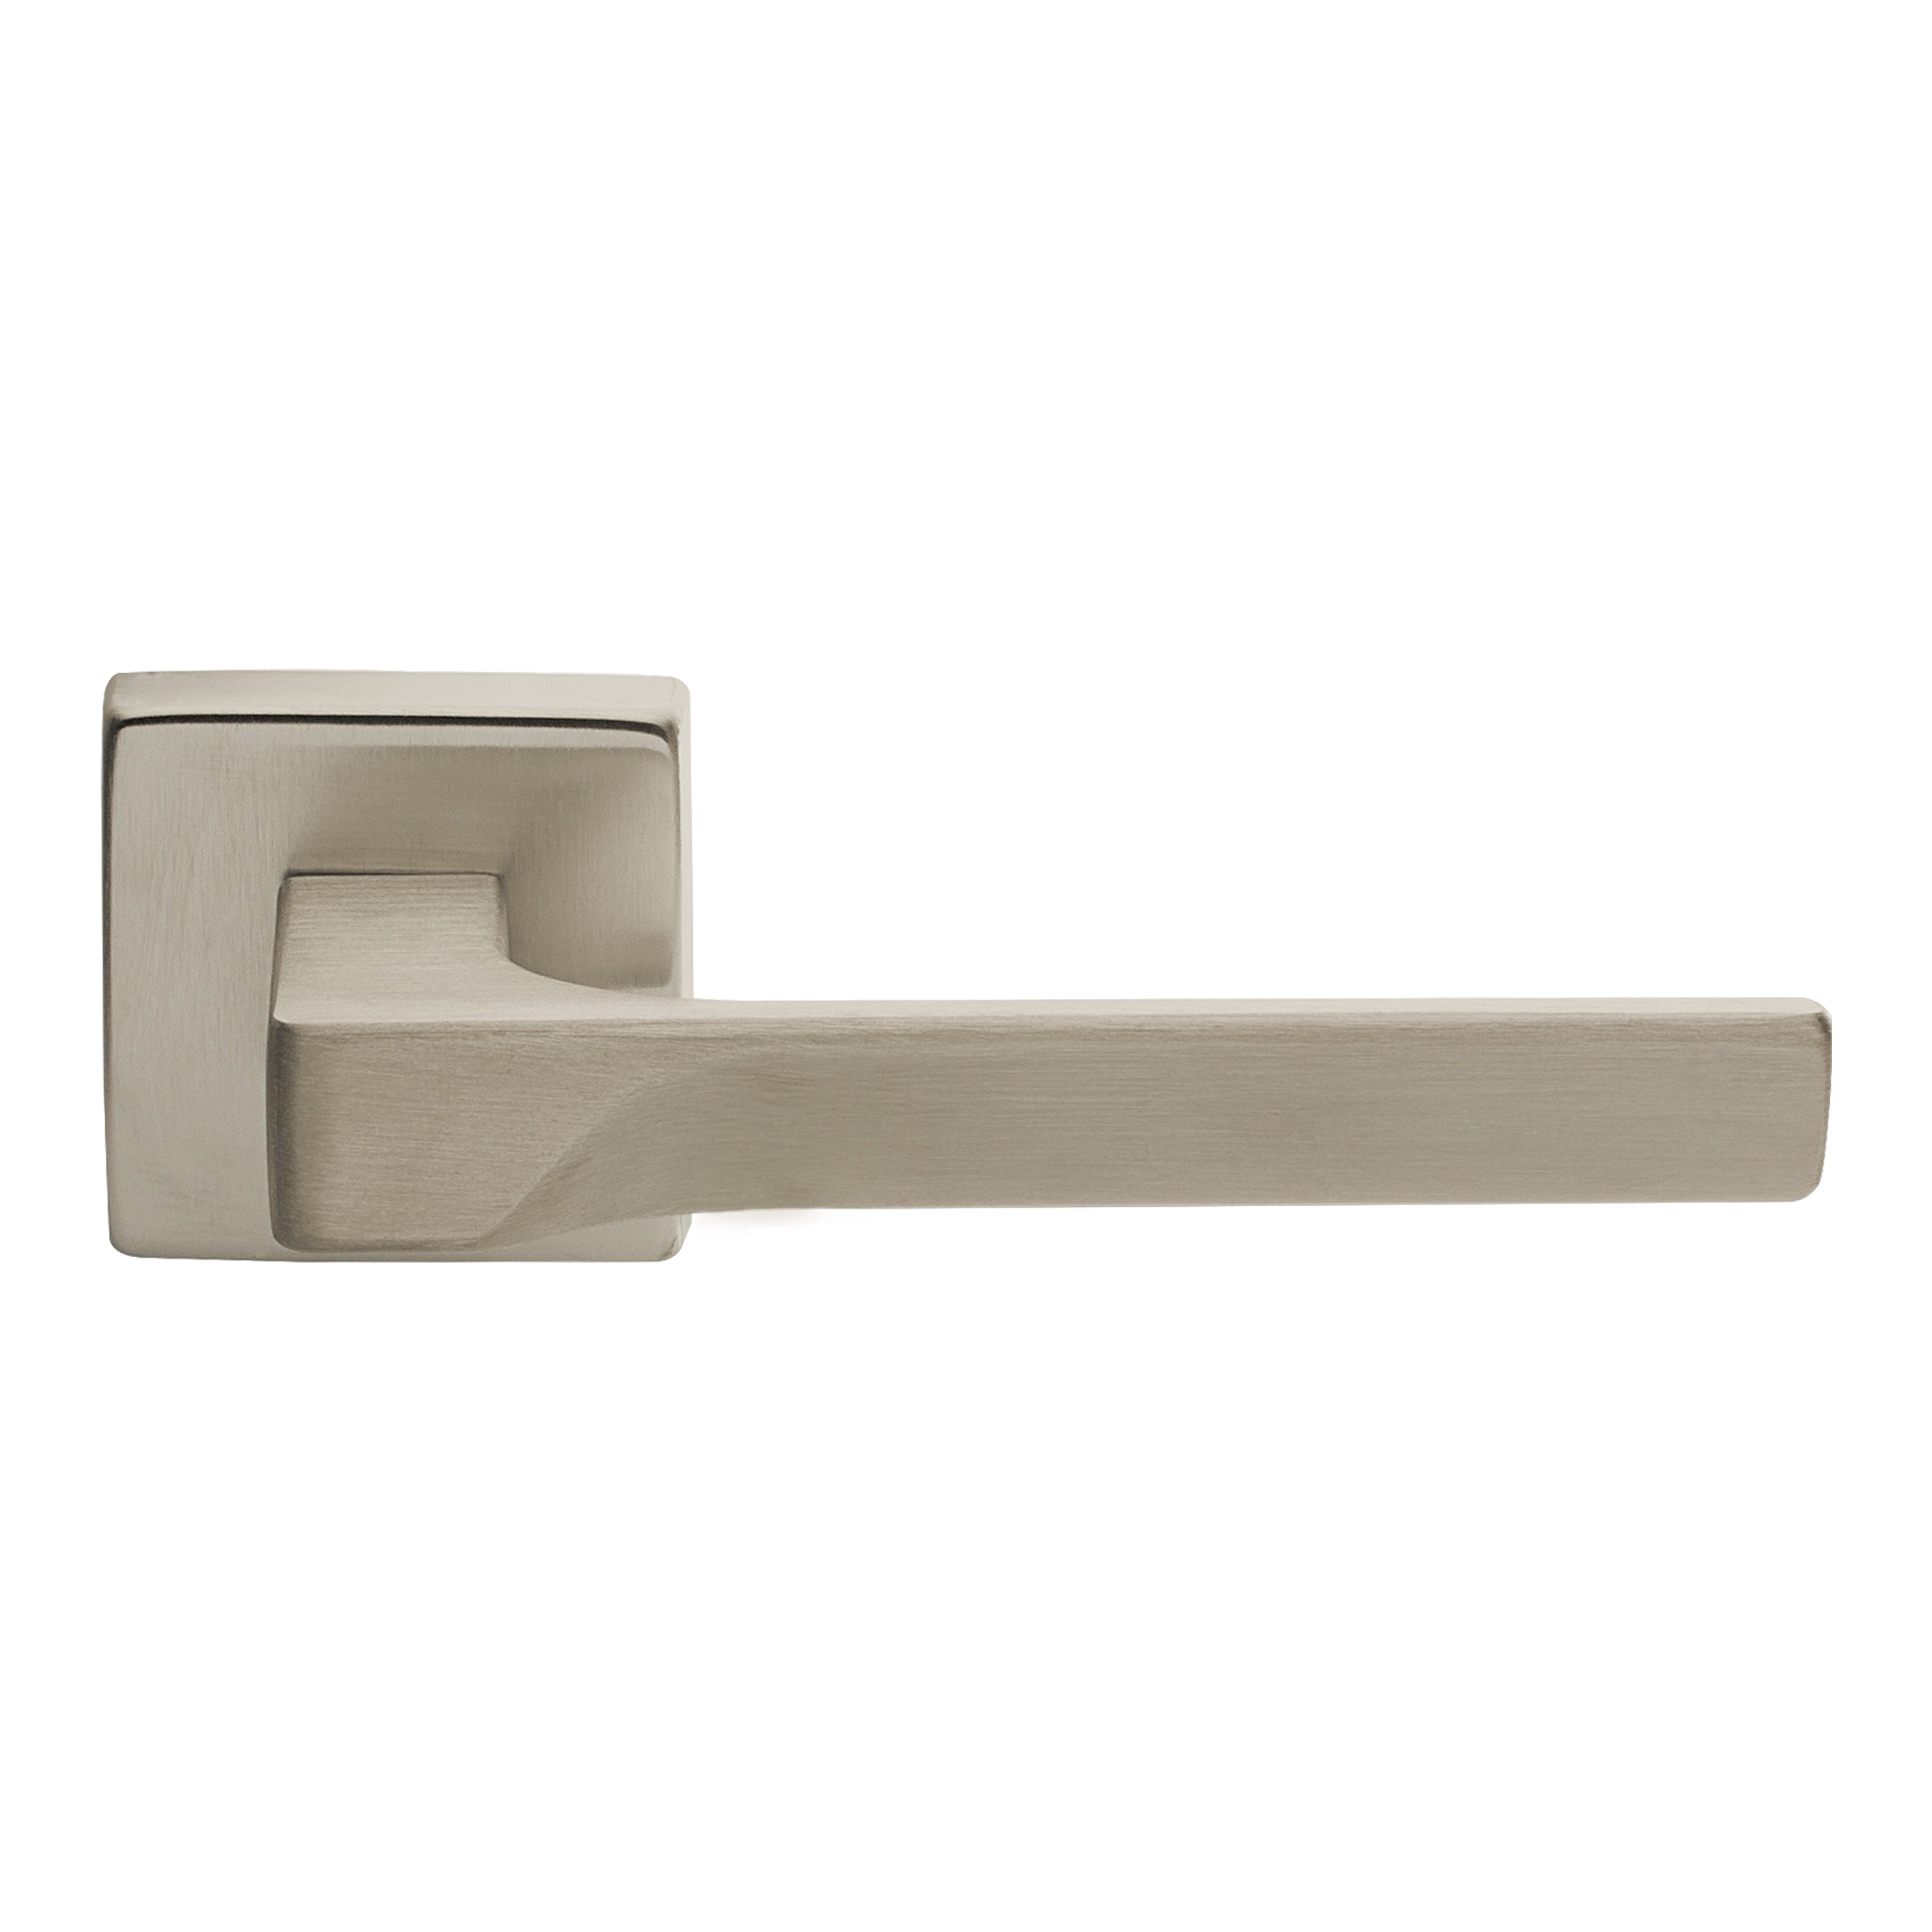 Manital Flash Italian Door Handle Chrome Plated or Brass or NIS  With Free Cylinder and Machine